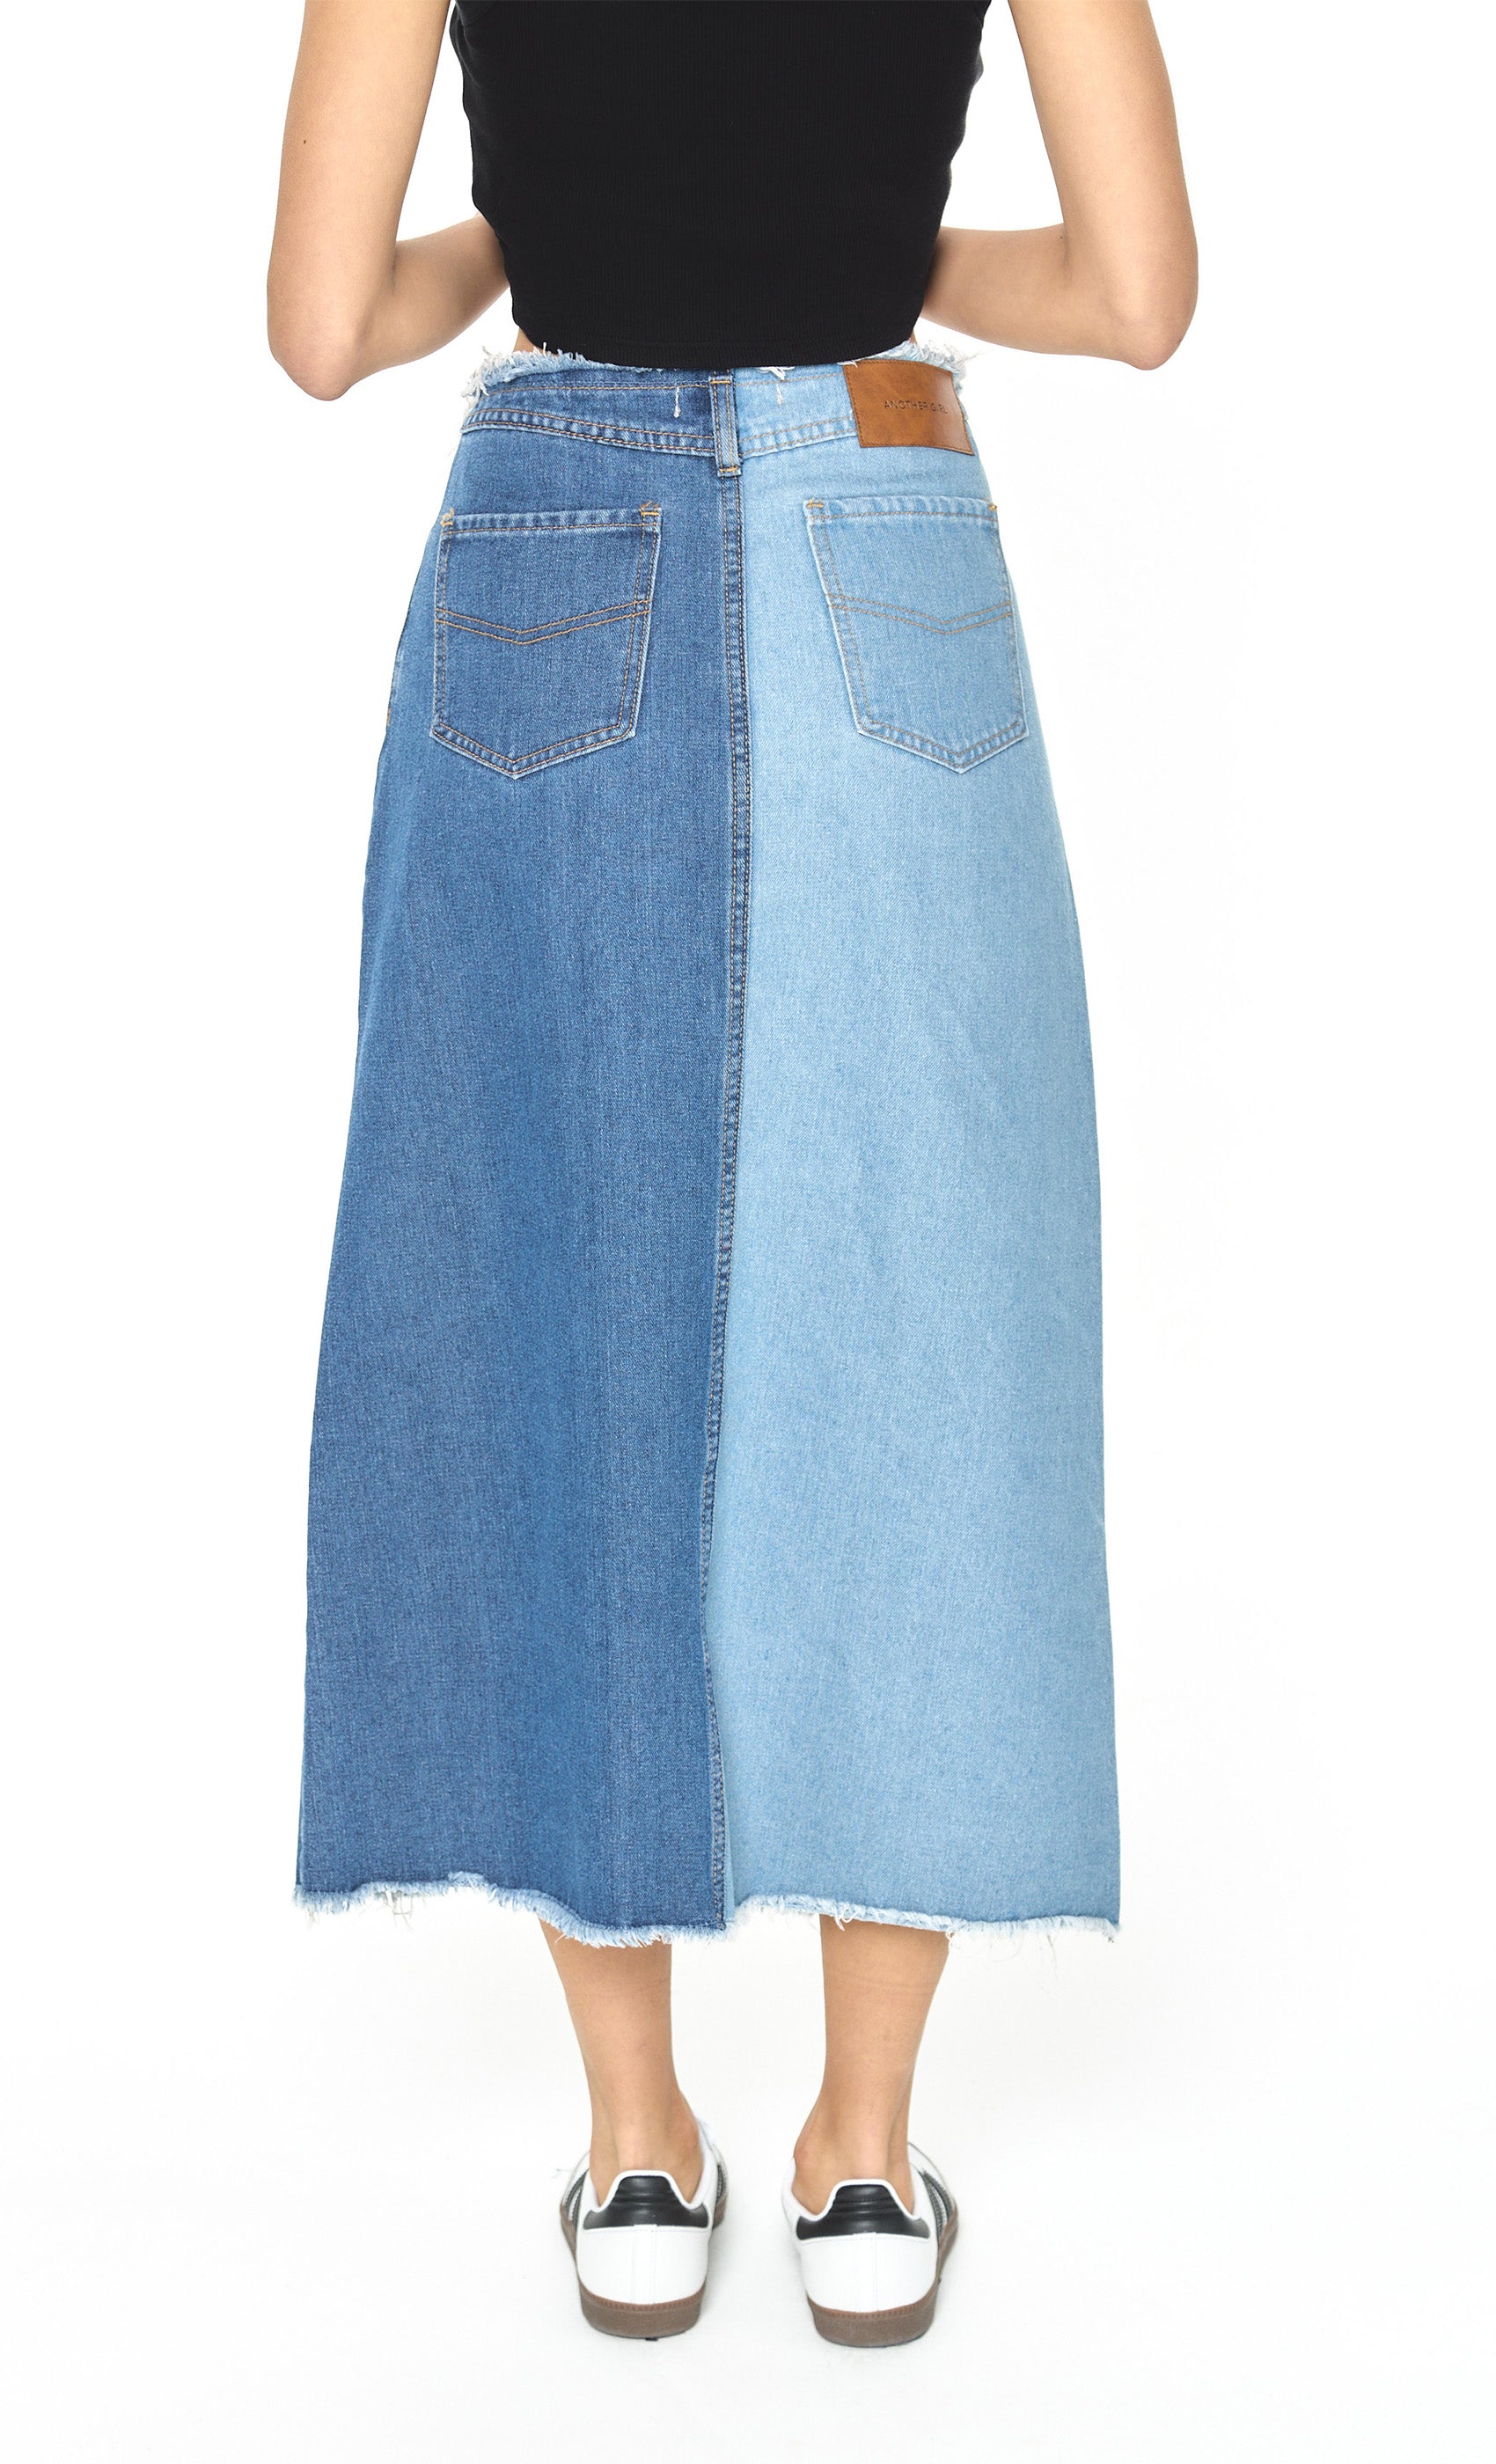 Free People Come As You Are Skirt - Denim Skirt - Mid-Rise Skirt - Lulus